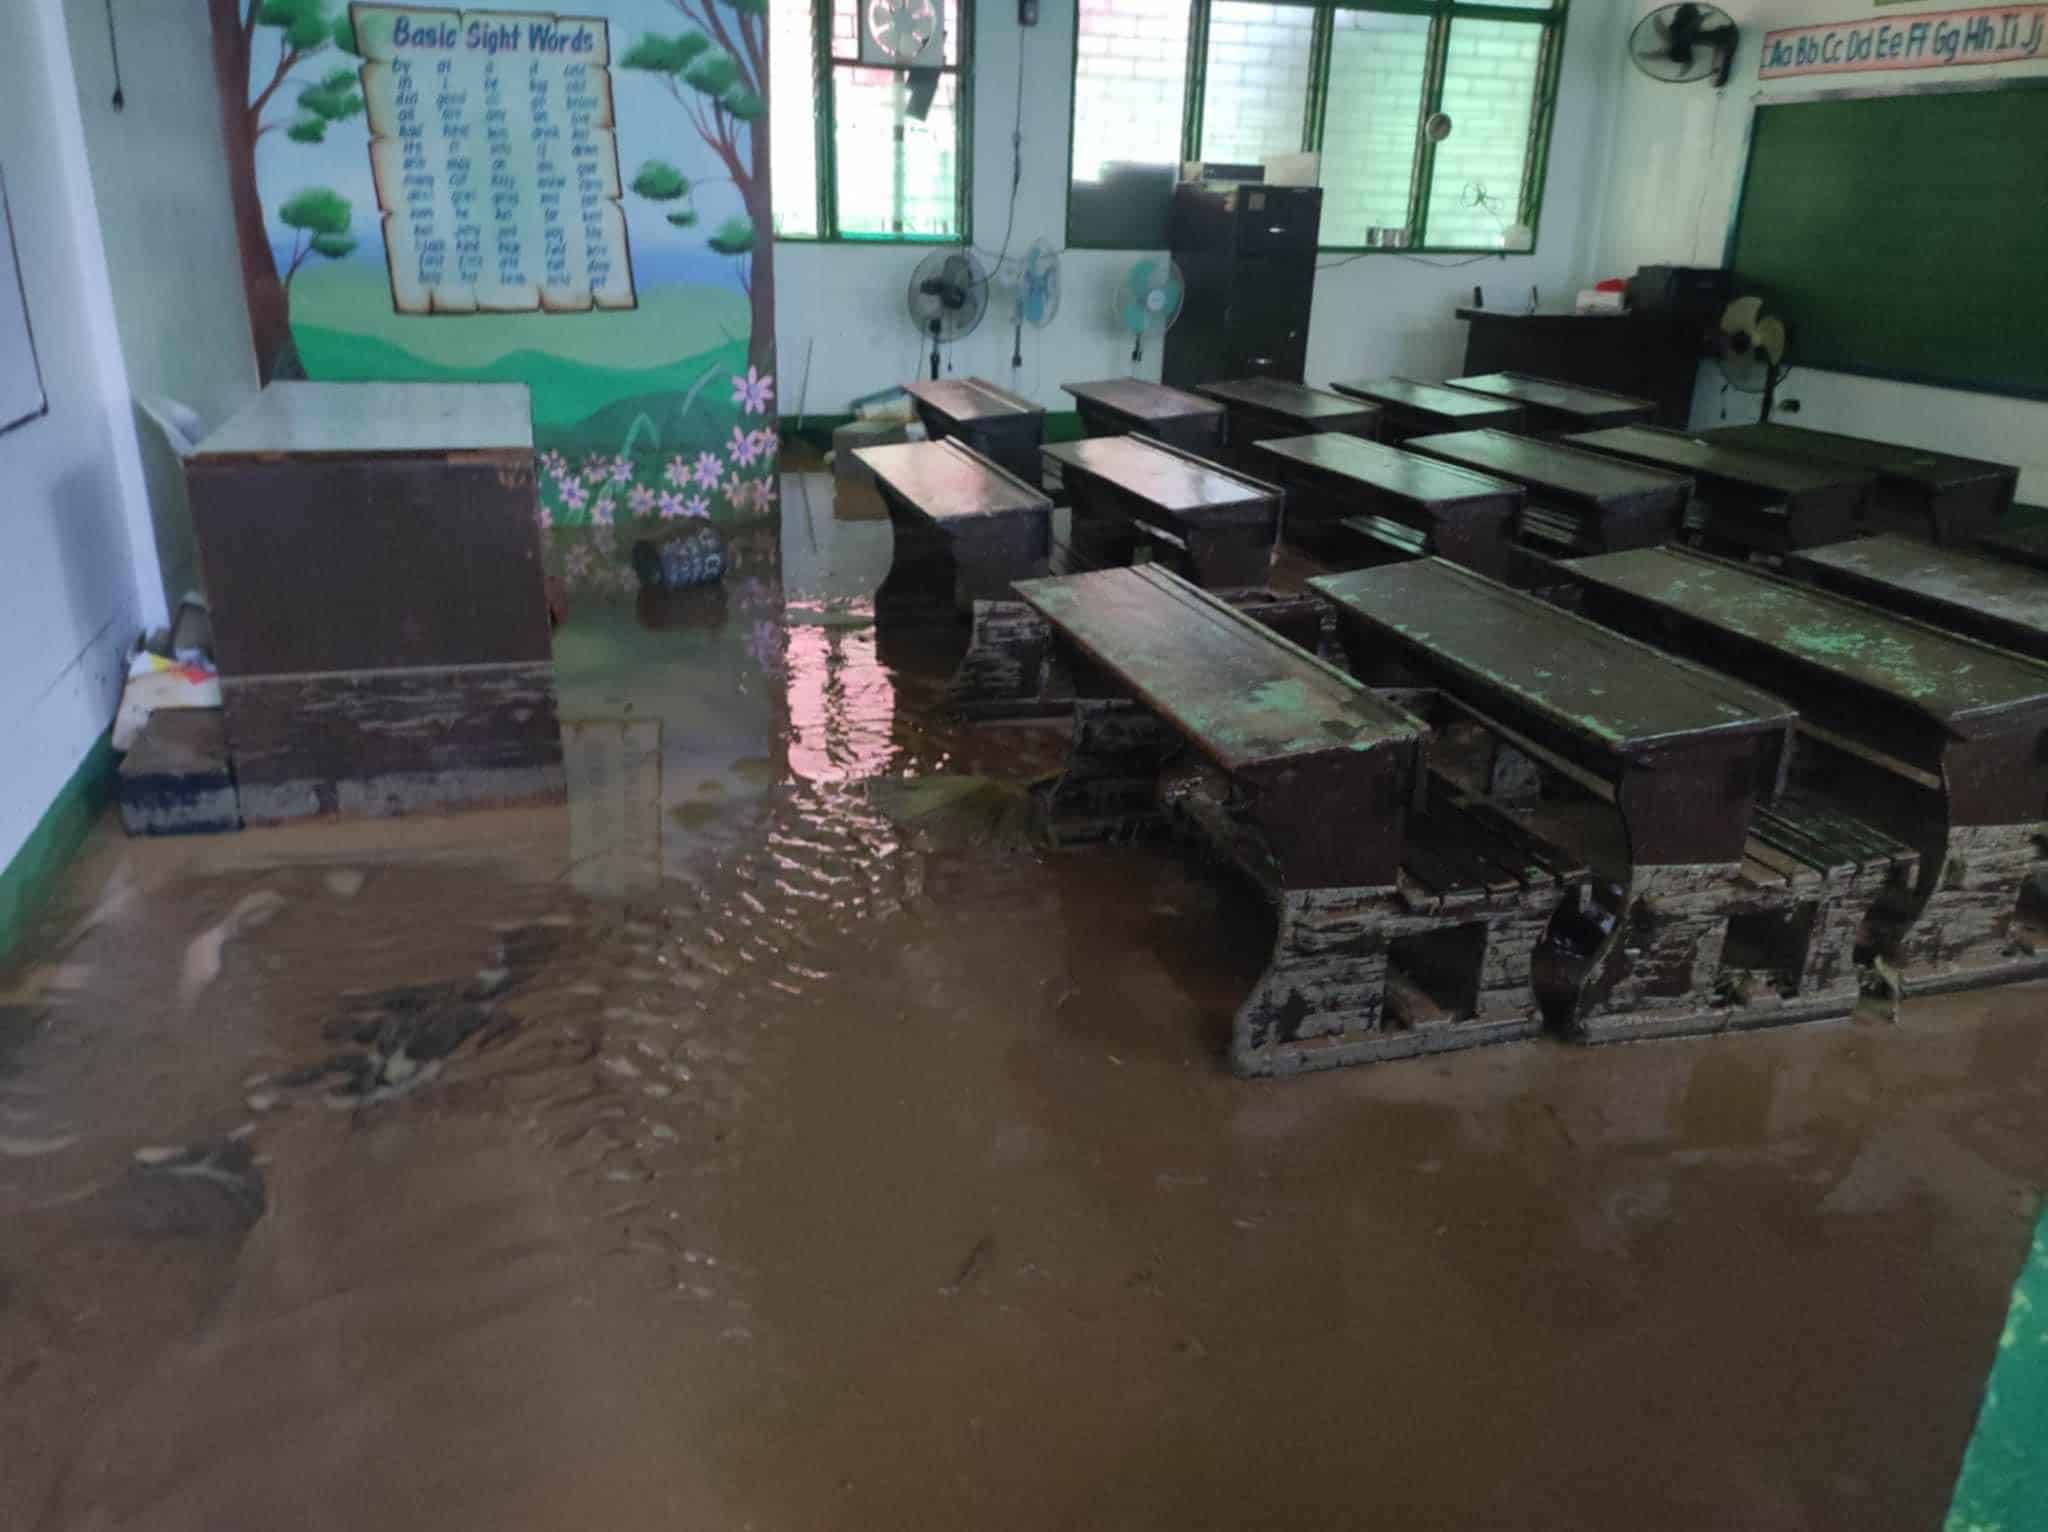 Massive flooding drenched school equipment inside classrooms in Sergia Soriano Esteban Integrated School in Barangay Kalaklan in Olongapo City.